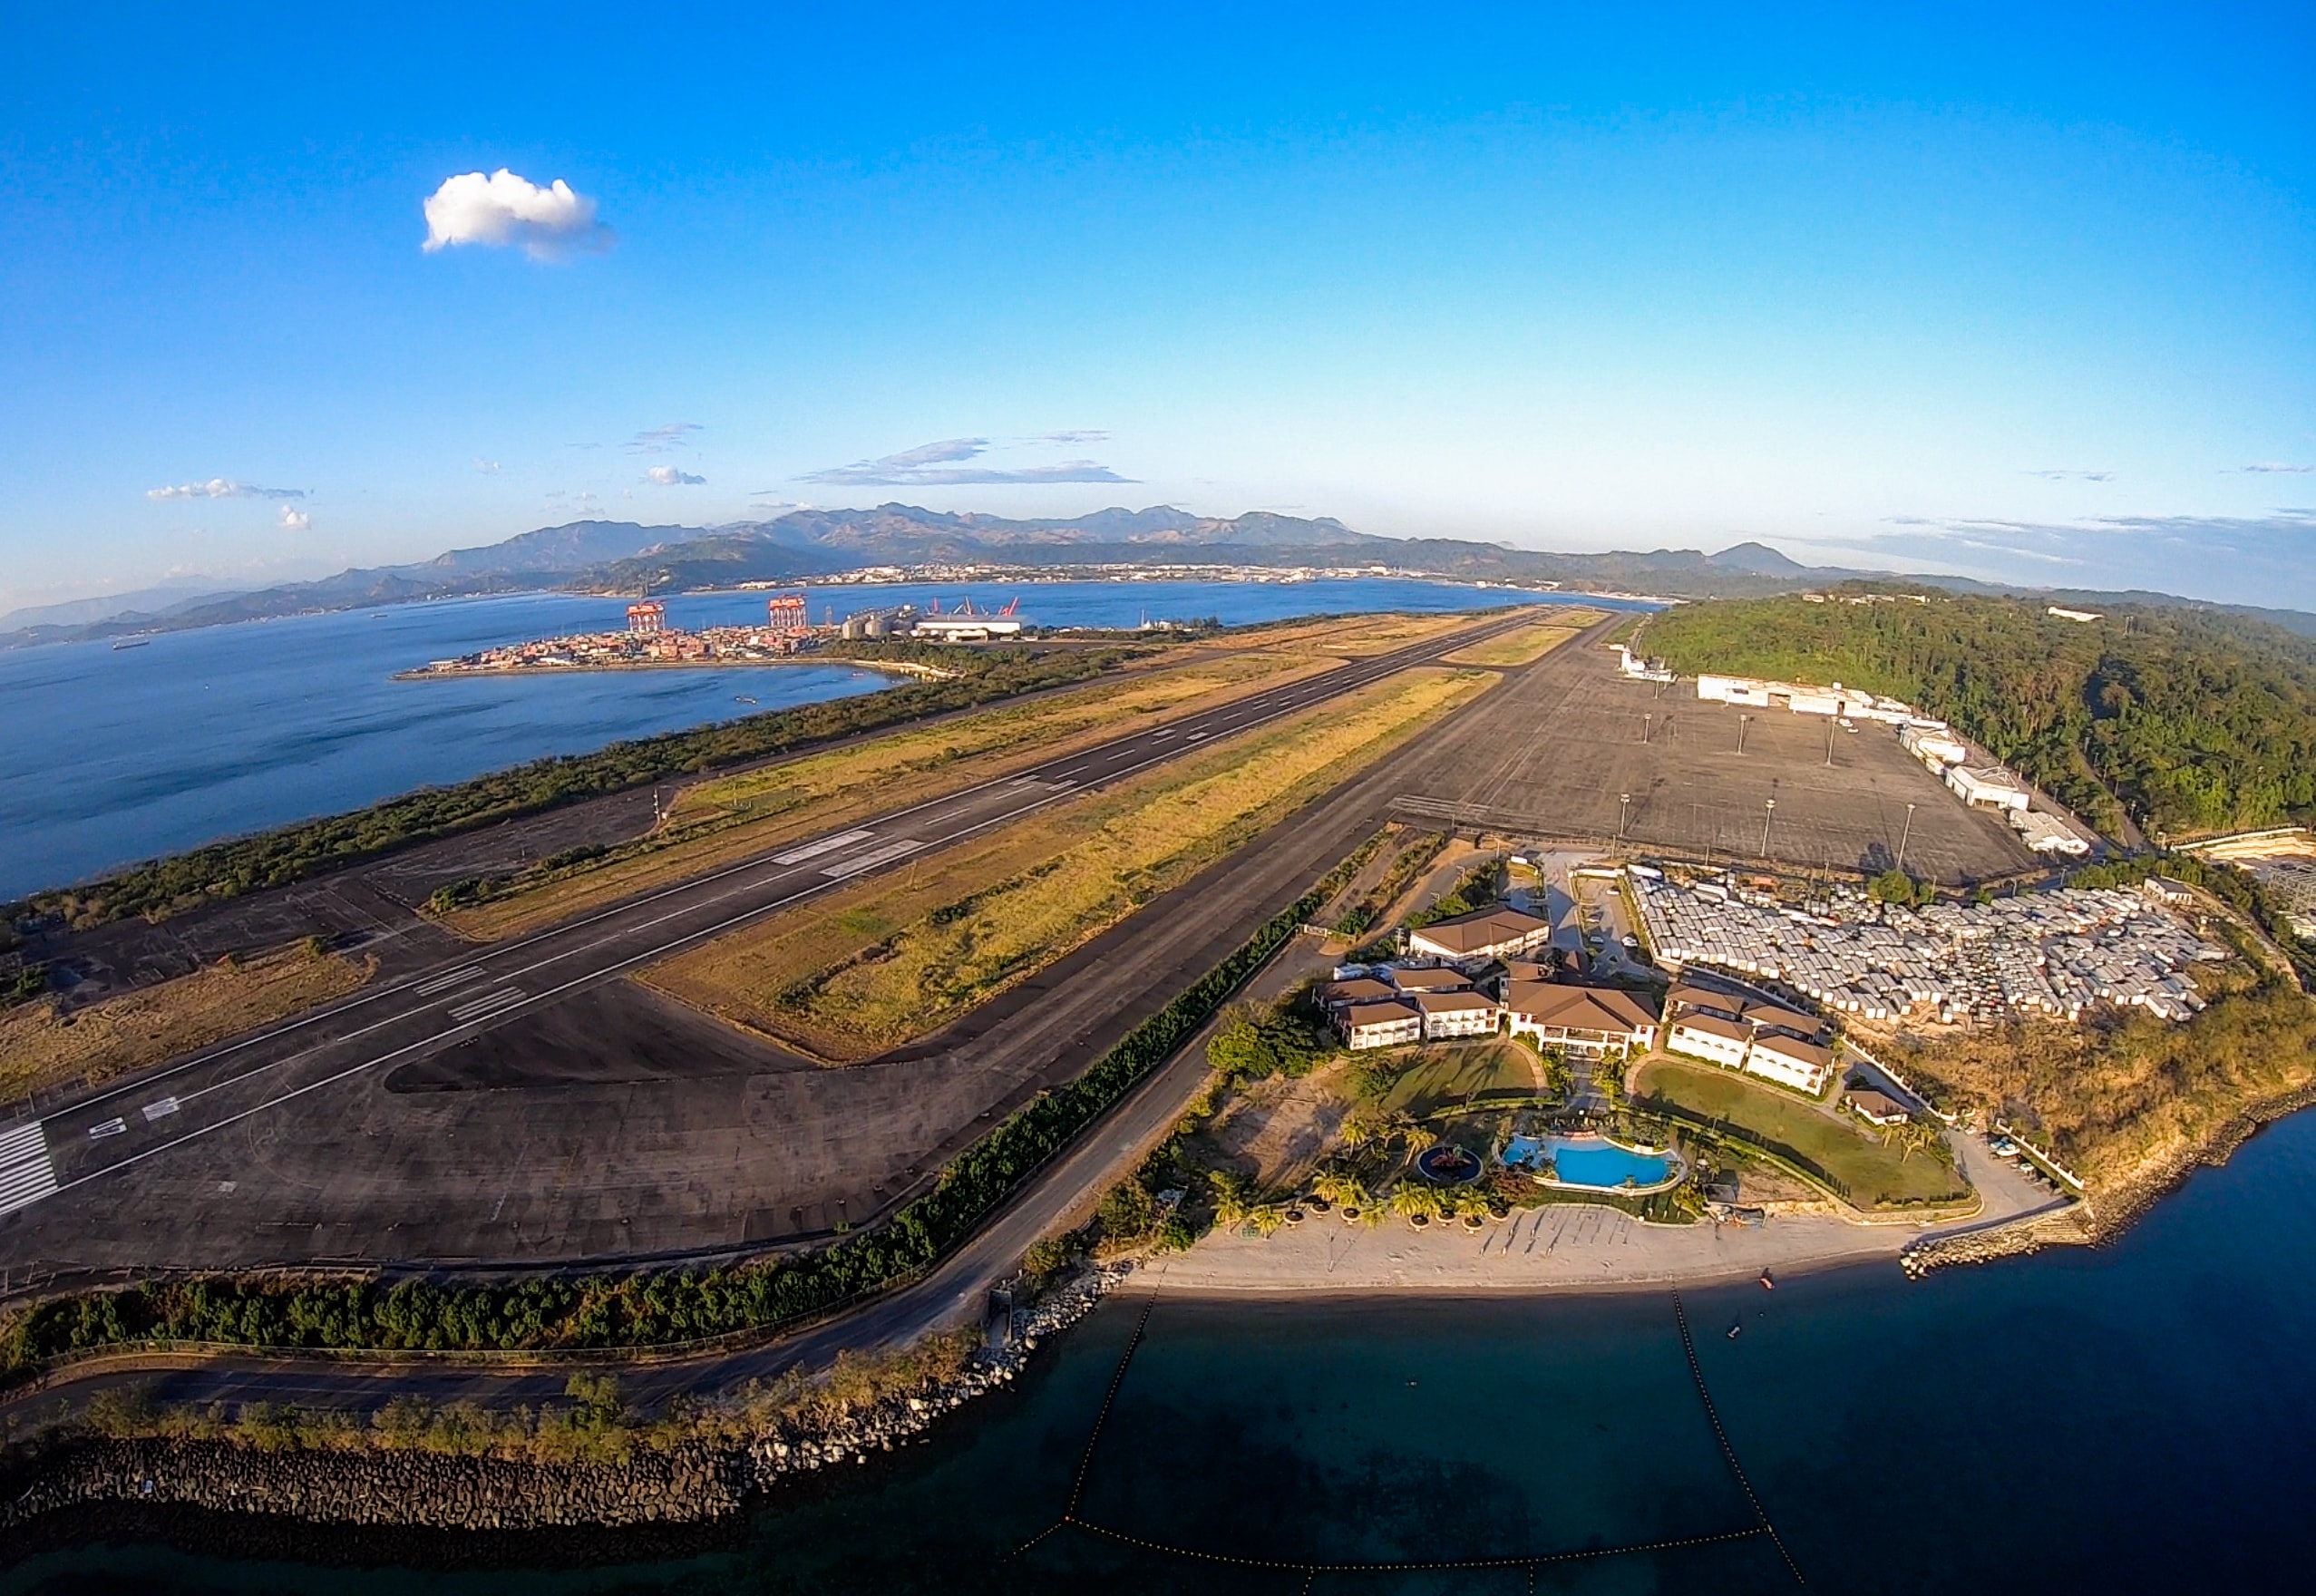 drone shot of landing strip and acea resort in subic bay freeport zone